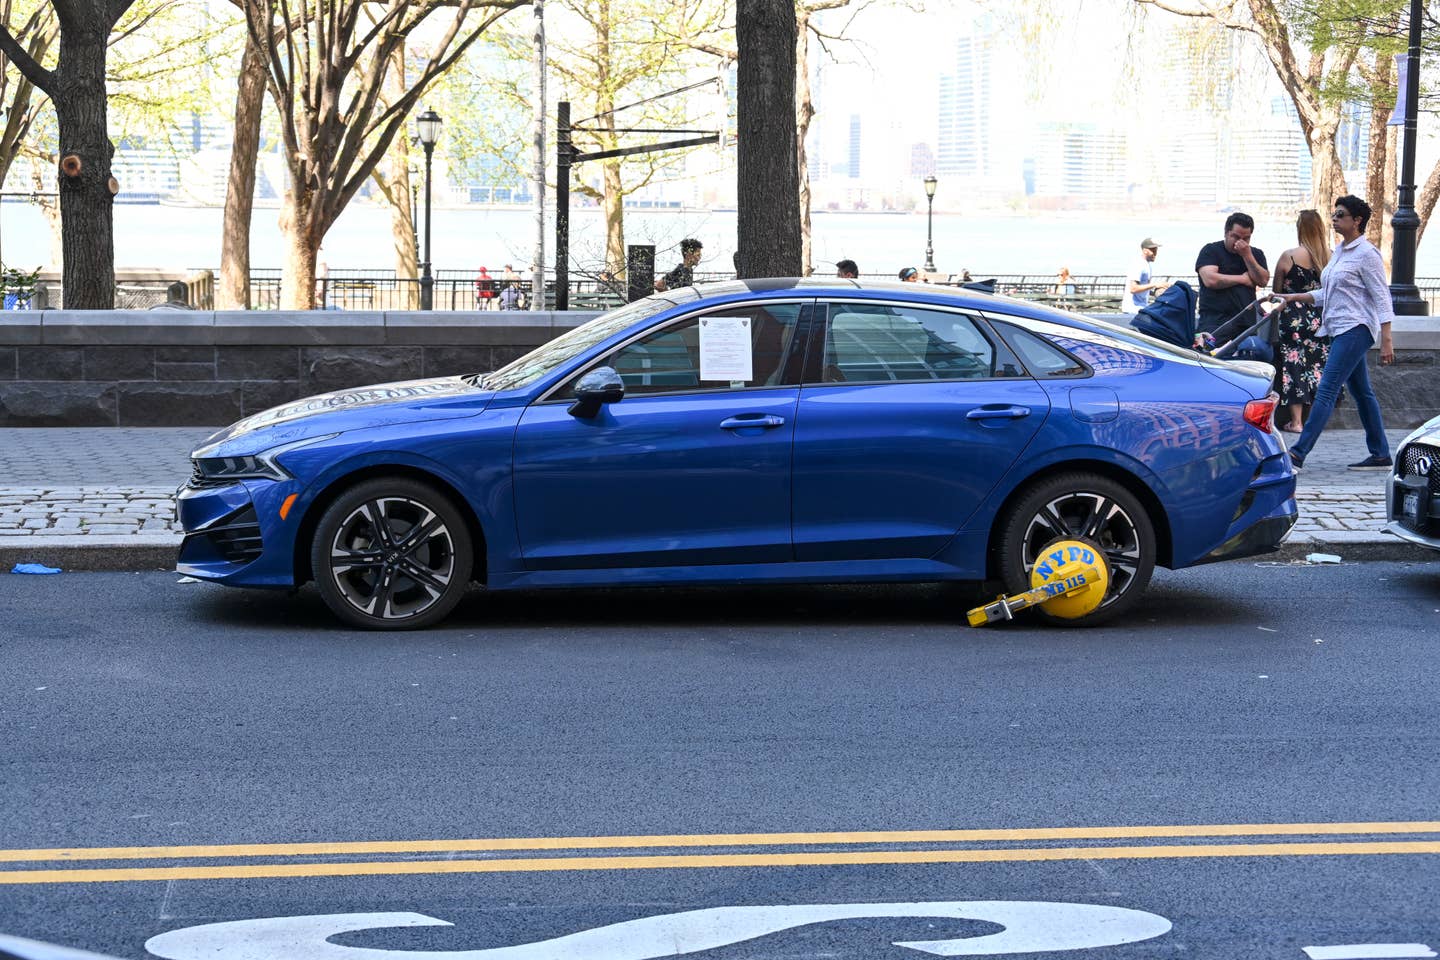 A parked car in New York City immobilized by a "boot."